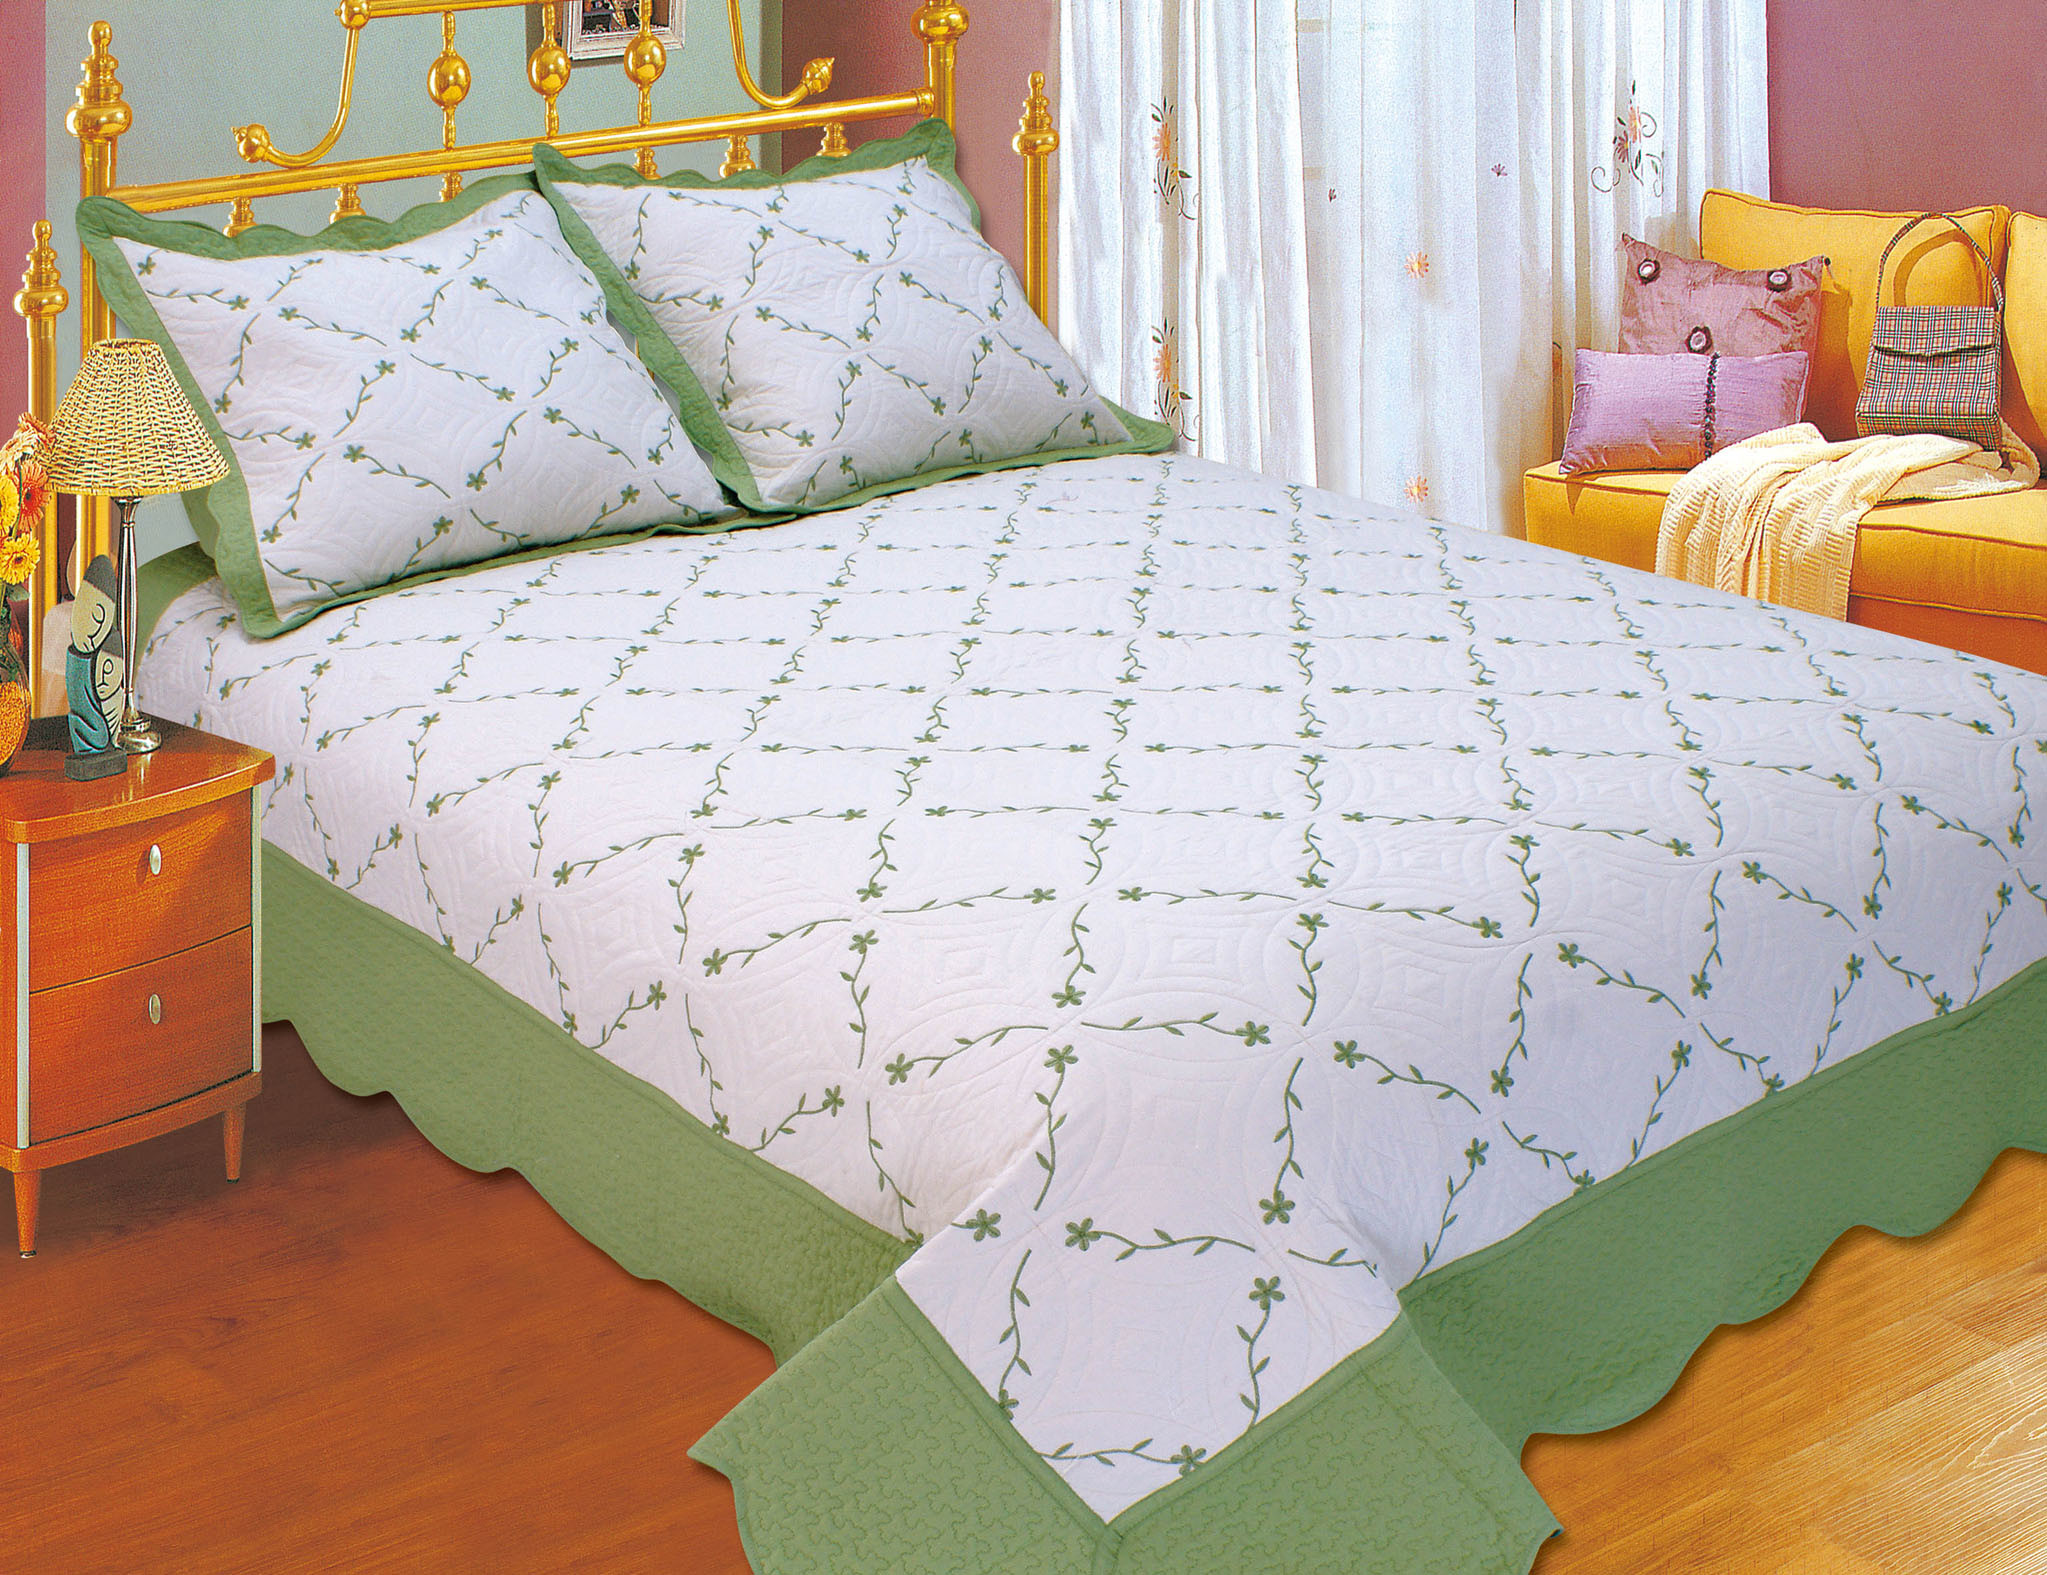 Best Plain Color Floral Bedding Sets Silky Soft Touch For Home And Hotel wholesale